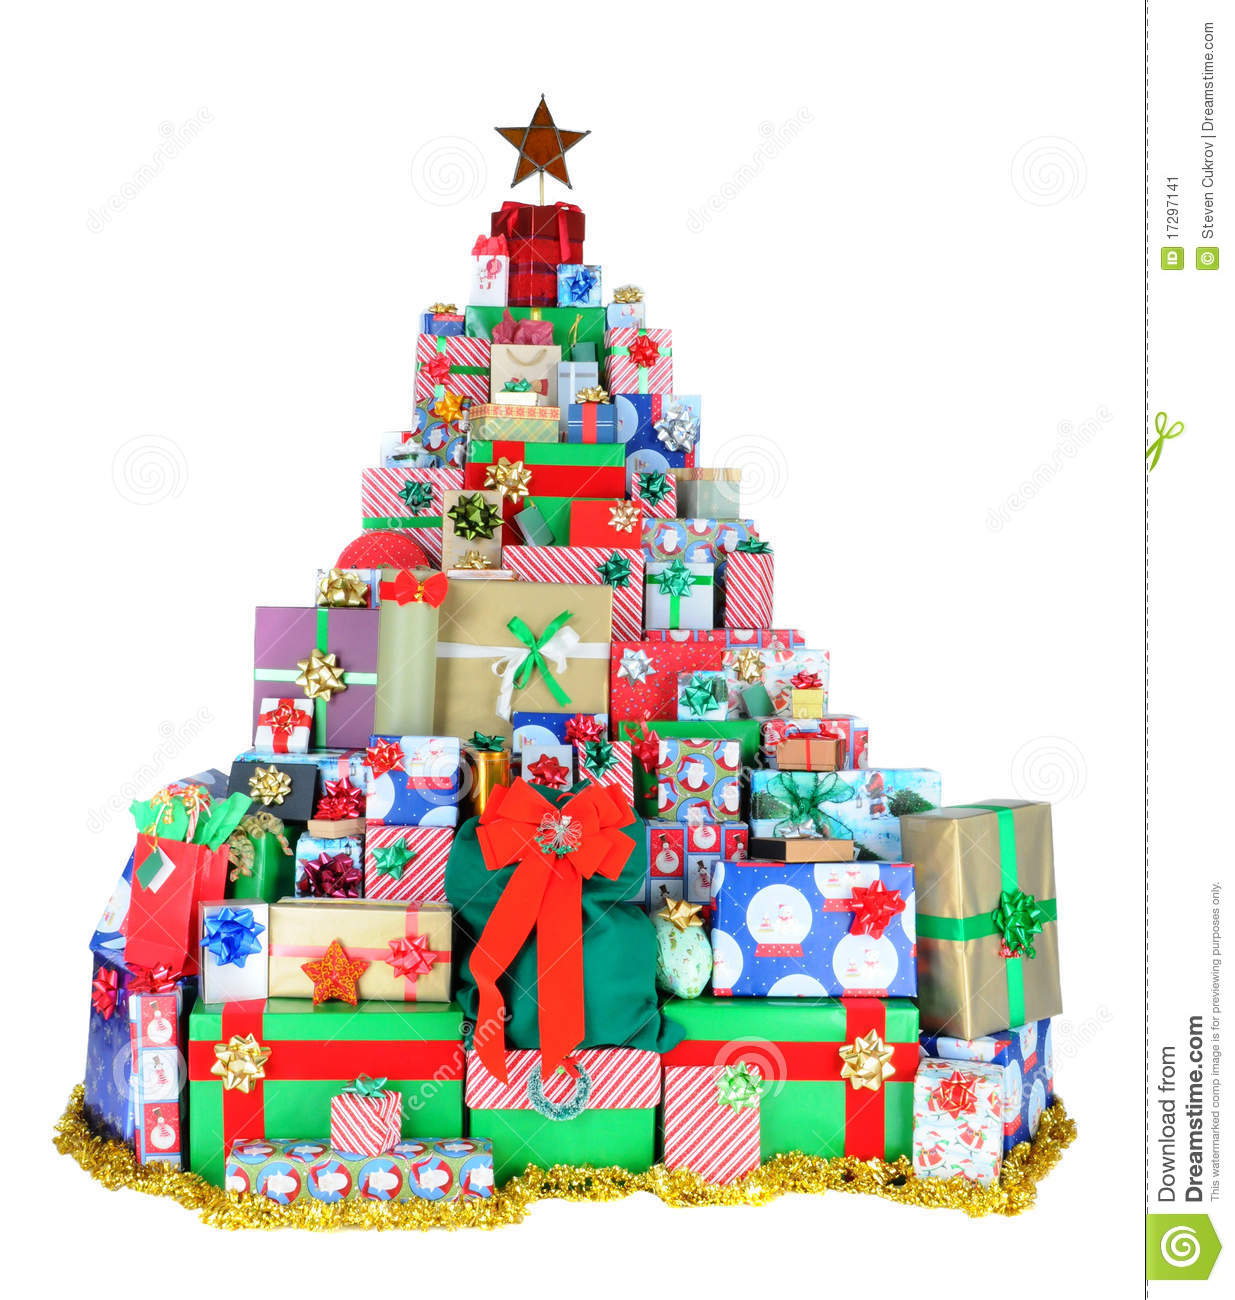 christmas tree of presents - teams Beroer Id 17297141 Download from Dreamstime.com This watermarked comp image is for previewing purposes only. Steven Cukrov | Dreamstime.com